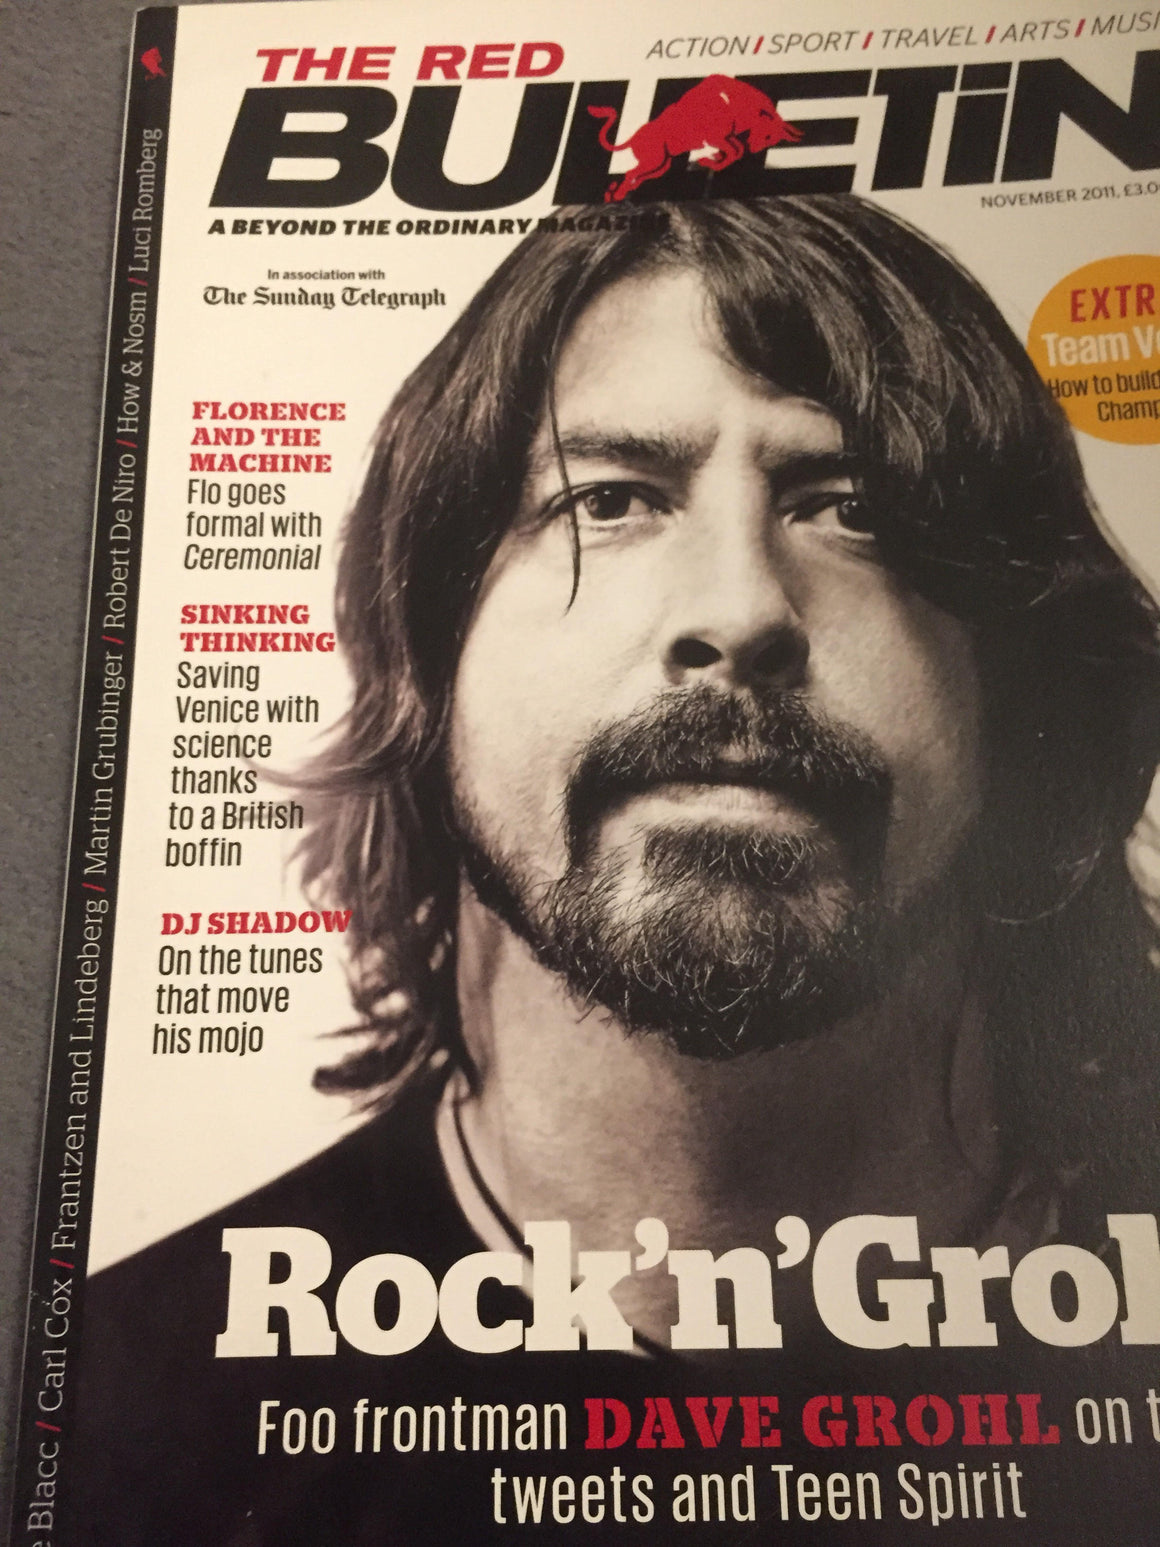 RED BULLETIN MAGAZINE NOVEMBER 2010: DAVE GROHL FLORENCE WELCH AND THE MACHINE